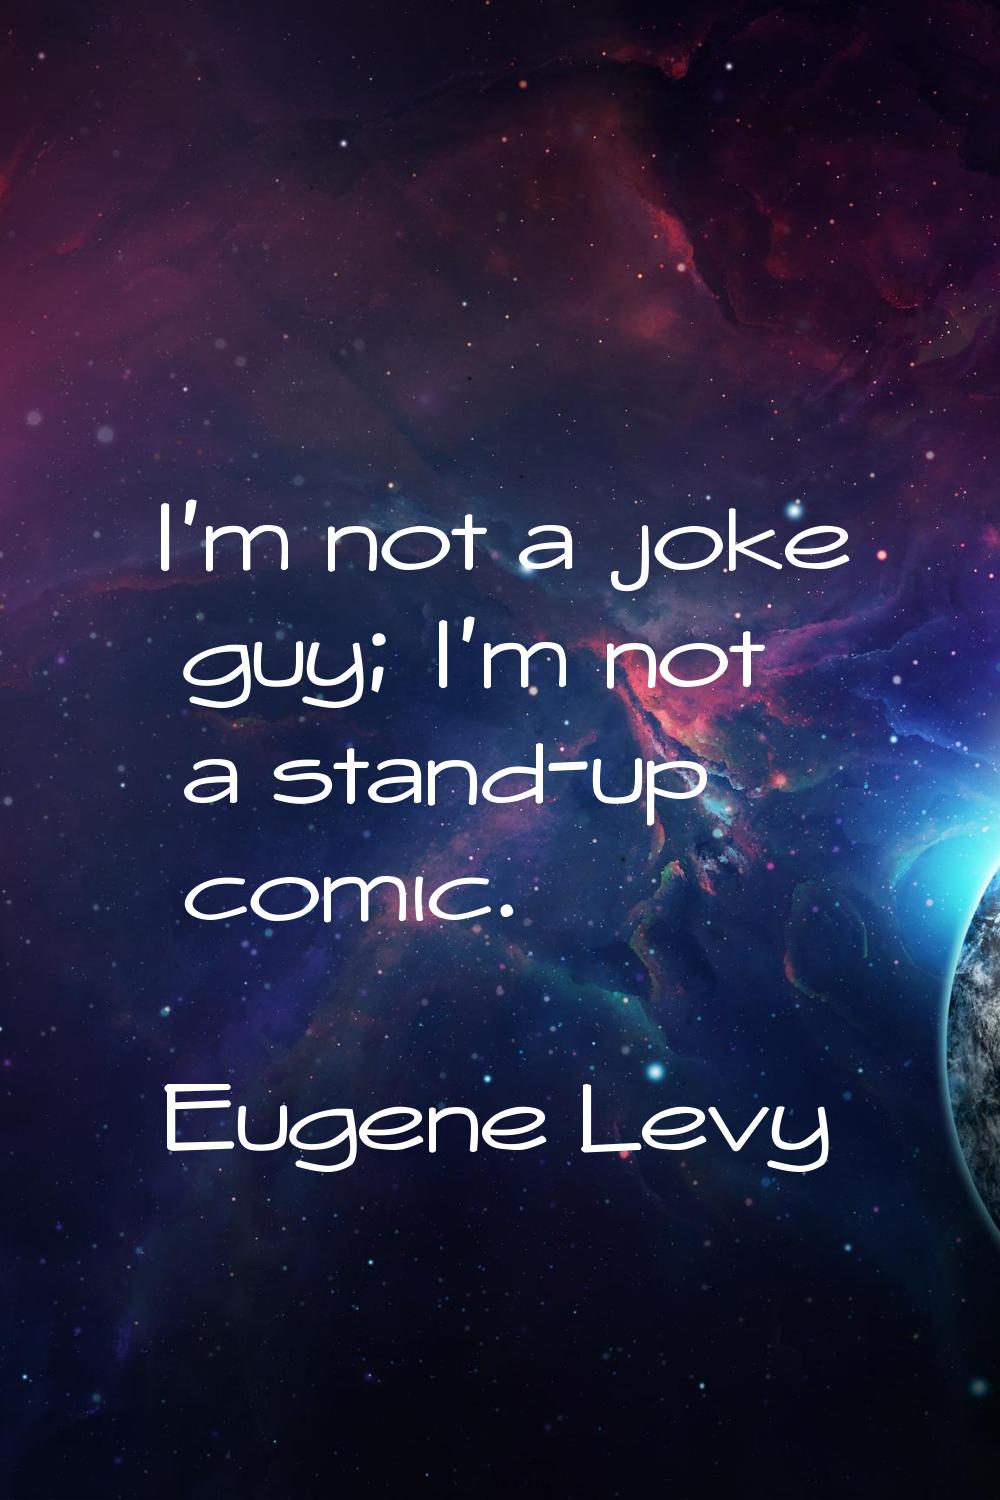 I'm not a joke guy; I'm not a stand-up comic.